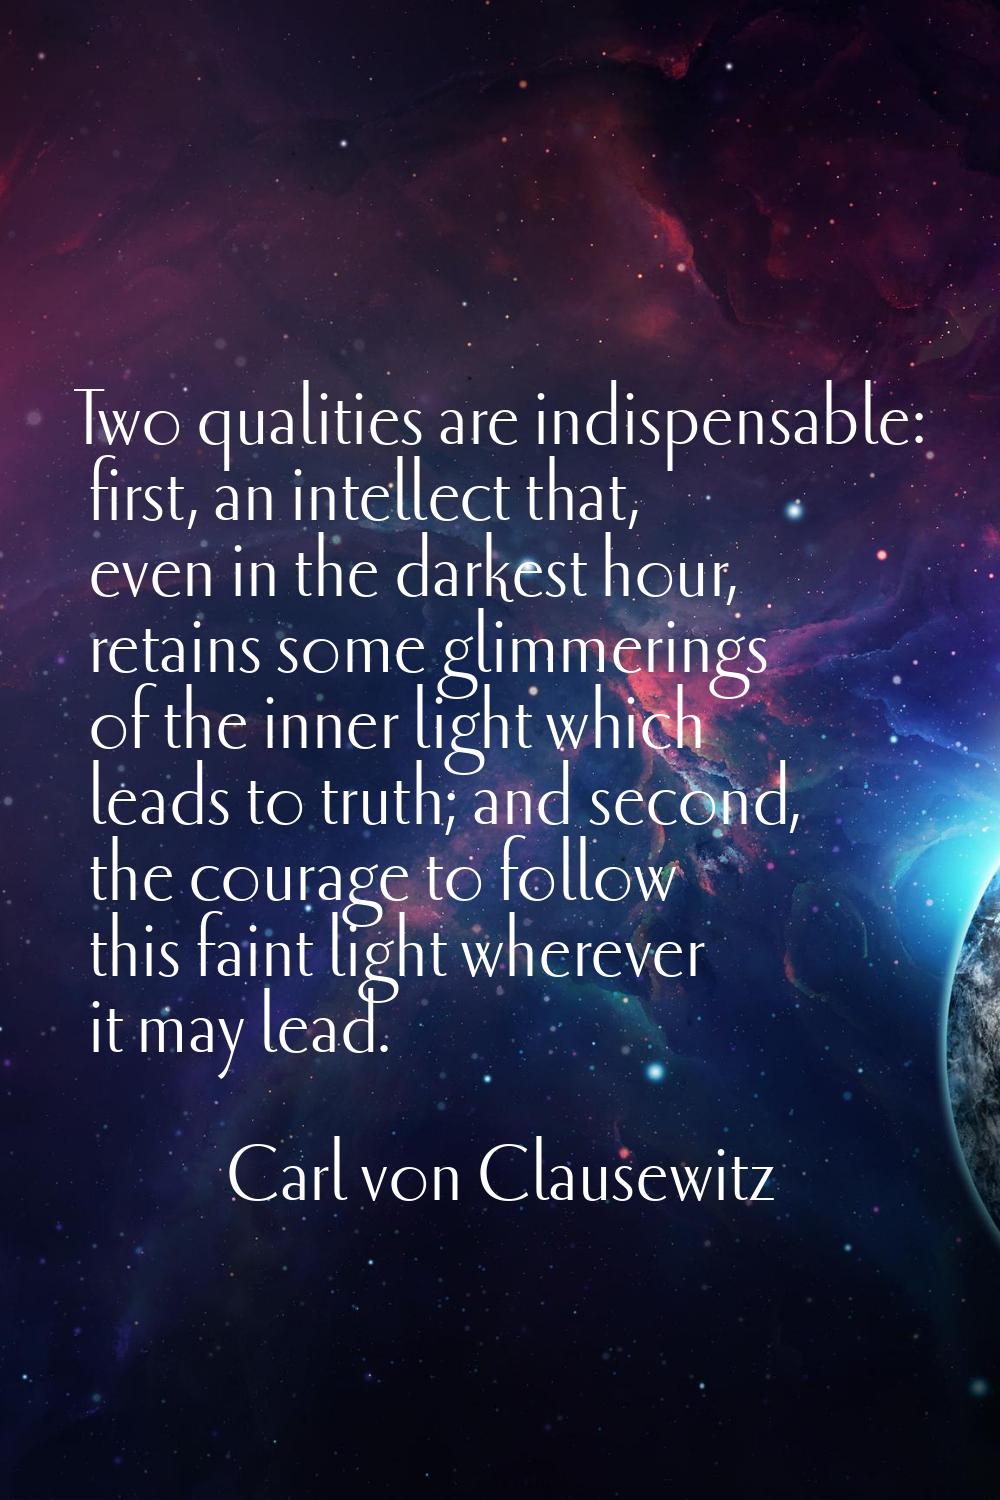 Two qualities are indispensable: first, an intellect that, even in the darkest hour, retains some g